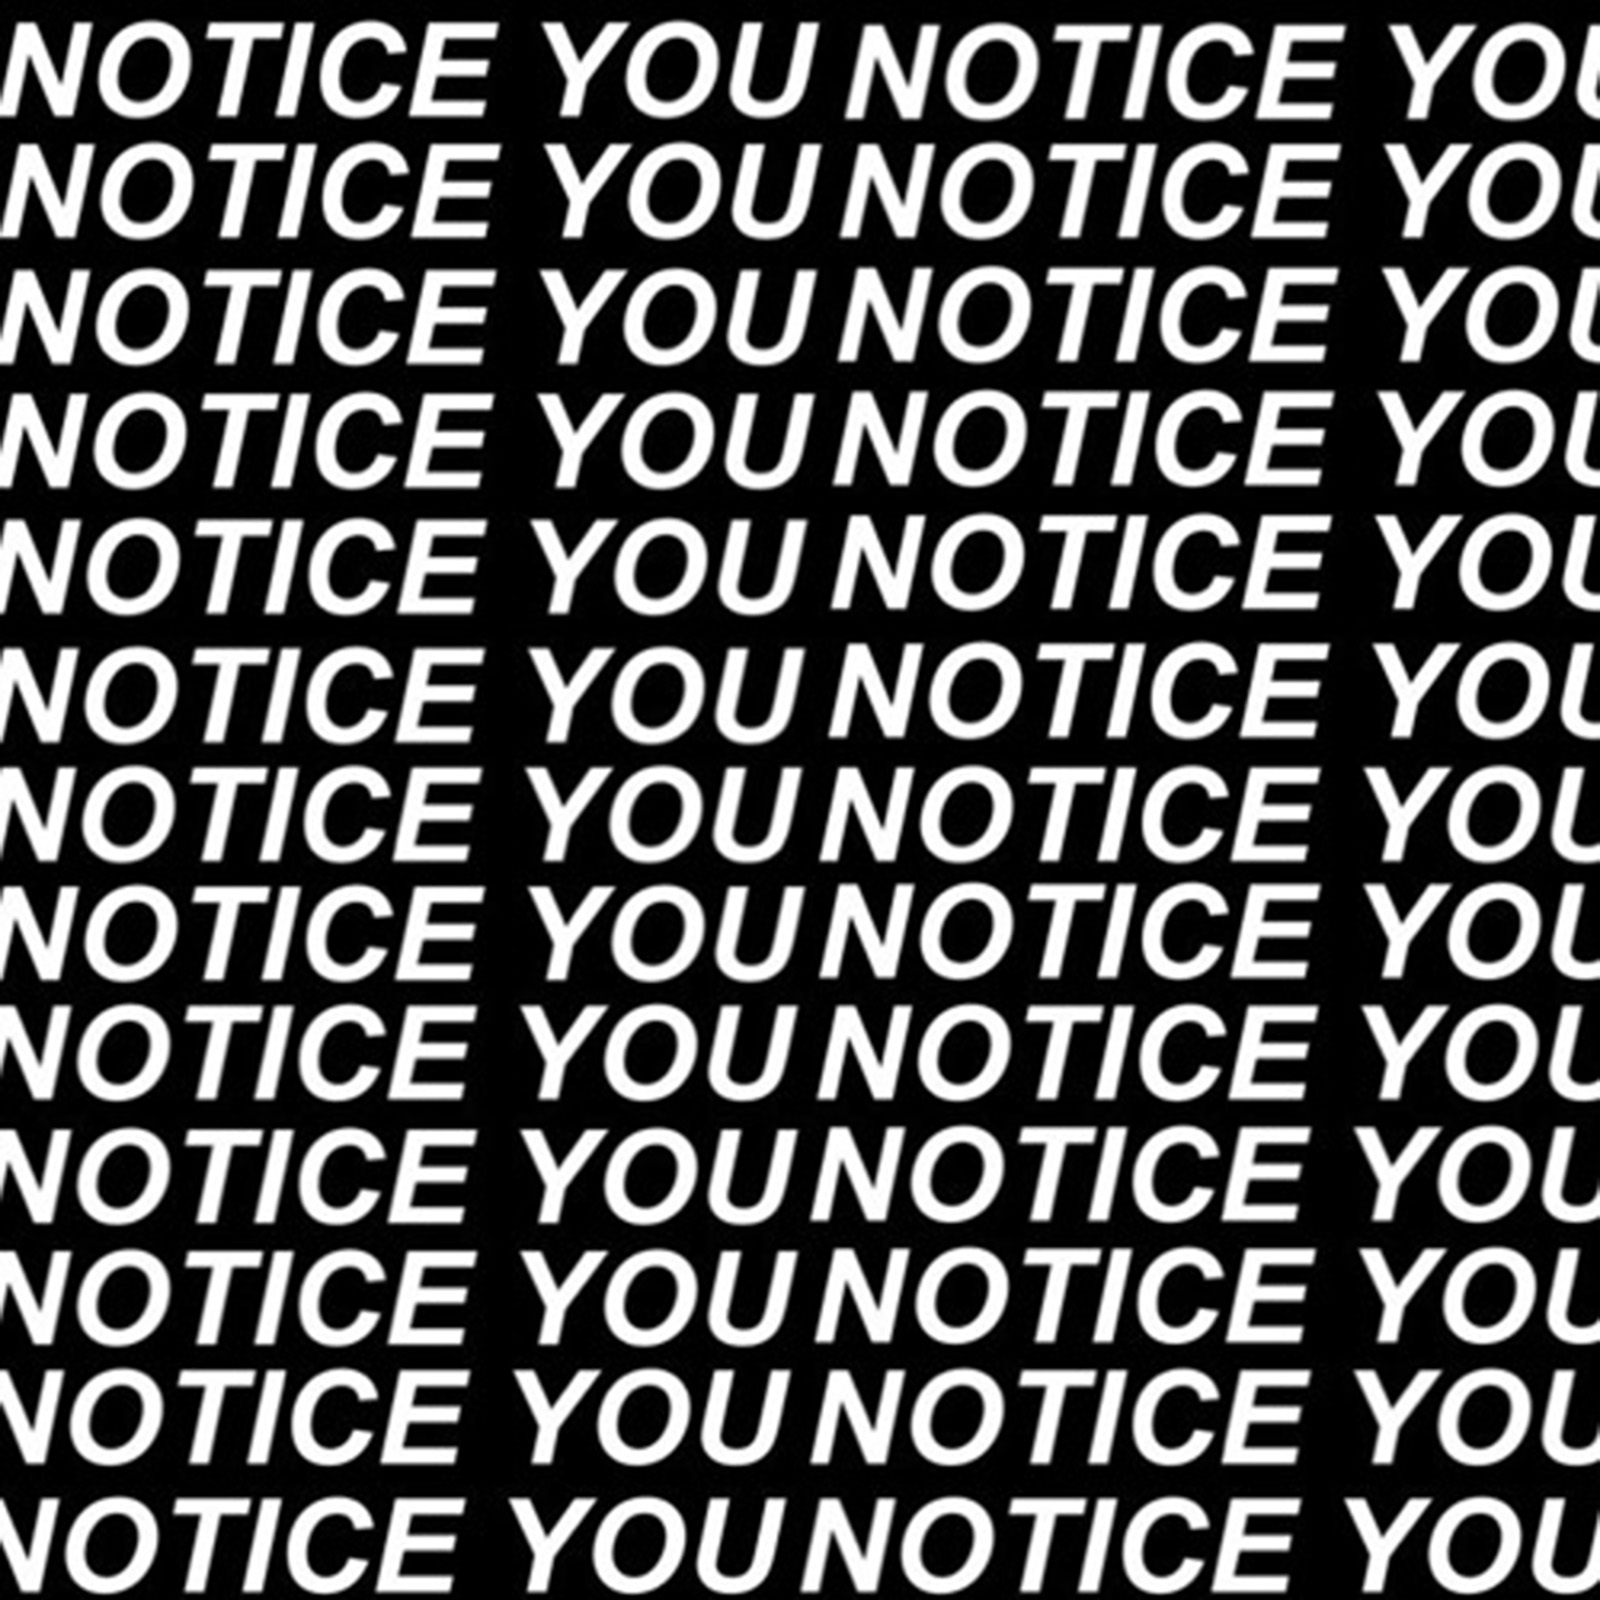 Notice You by Kwabsmah & RJZ